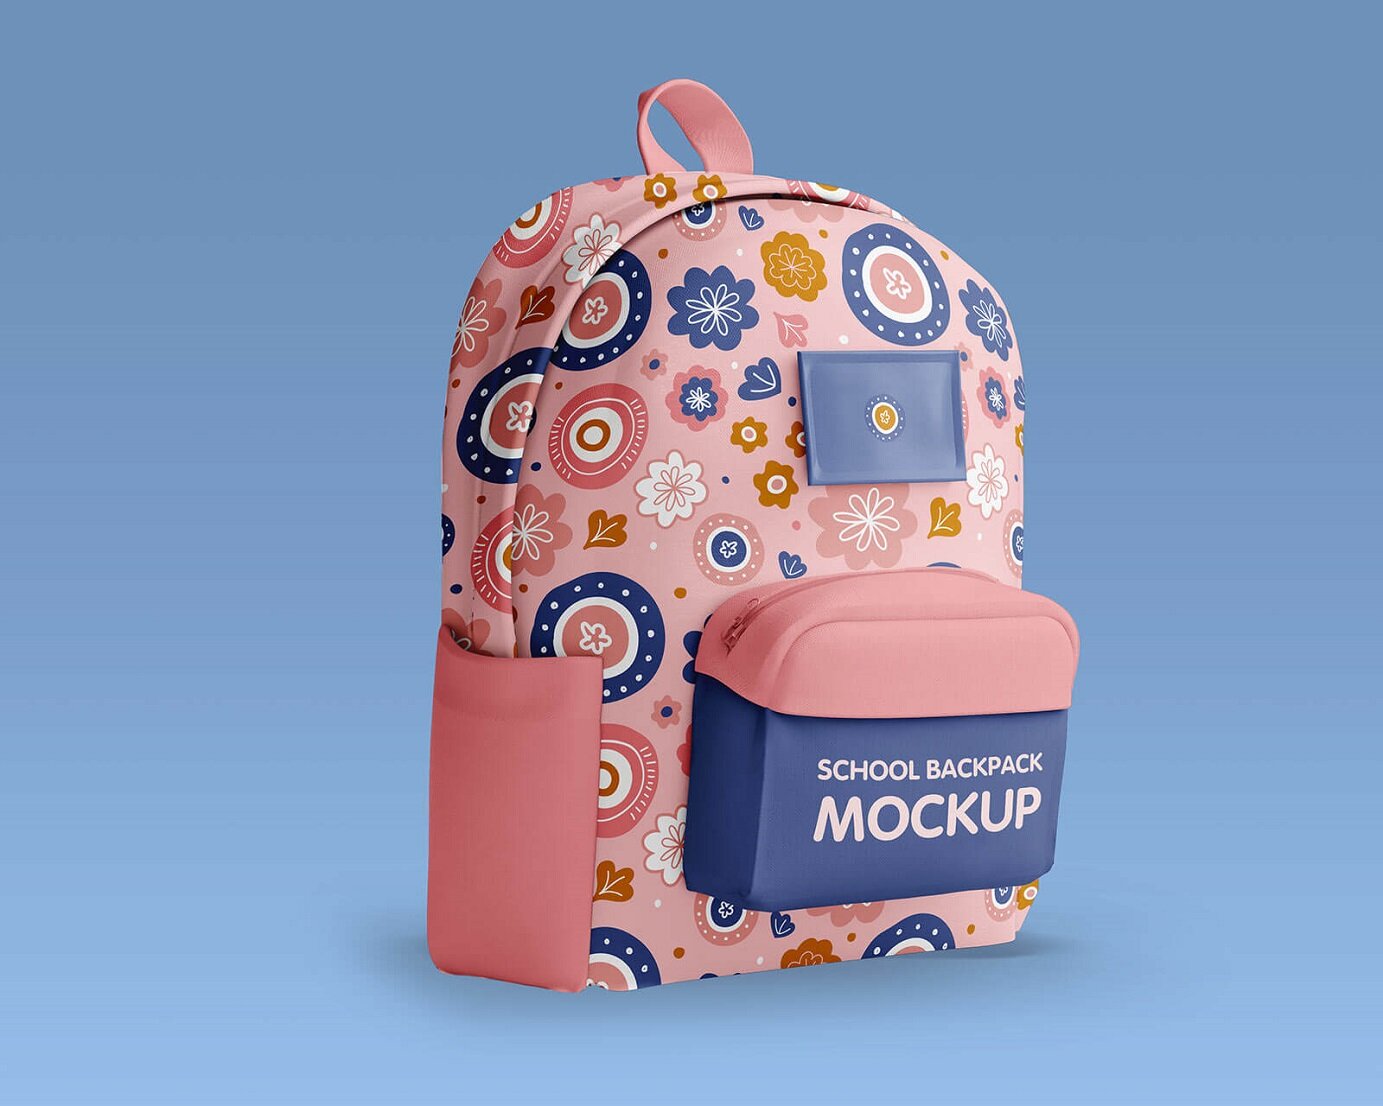 backpack mockup,template,how to add an image to a mockup,free mockup generator,etsy instant download,psd template,templates,how to sell instant downloads on etsy,cloud backup,online backup,mockup,mockups,high school,mock-up,how to back up your computer,how to back up files,tech pack,how to paint with pencil watercolour,how to organize computer folders,facebook ad bangla tutorial,how to organize your computer,how to paint with pencil colour